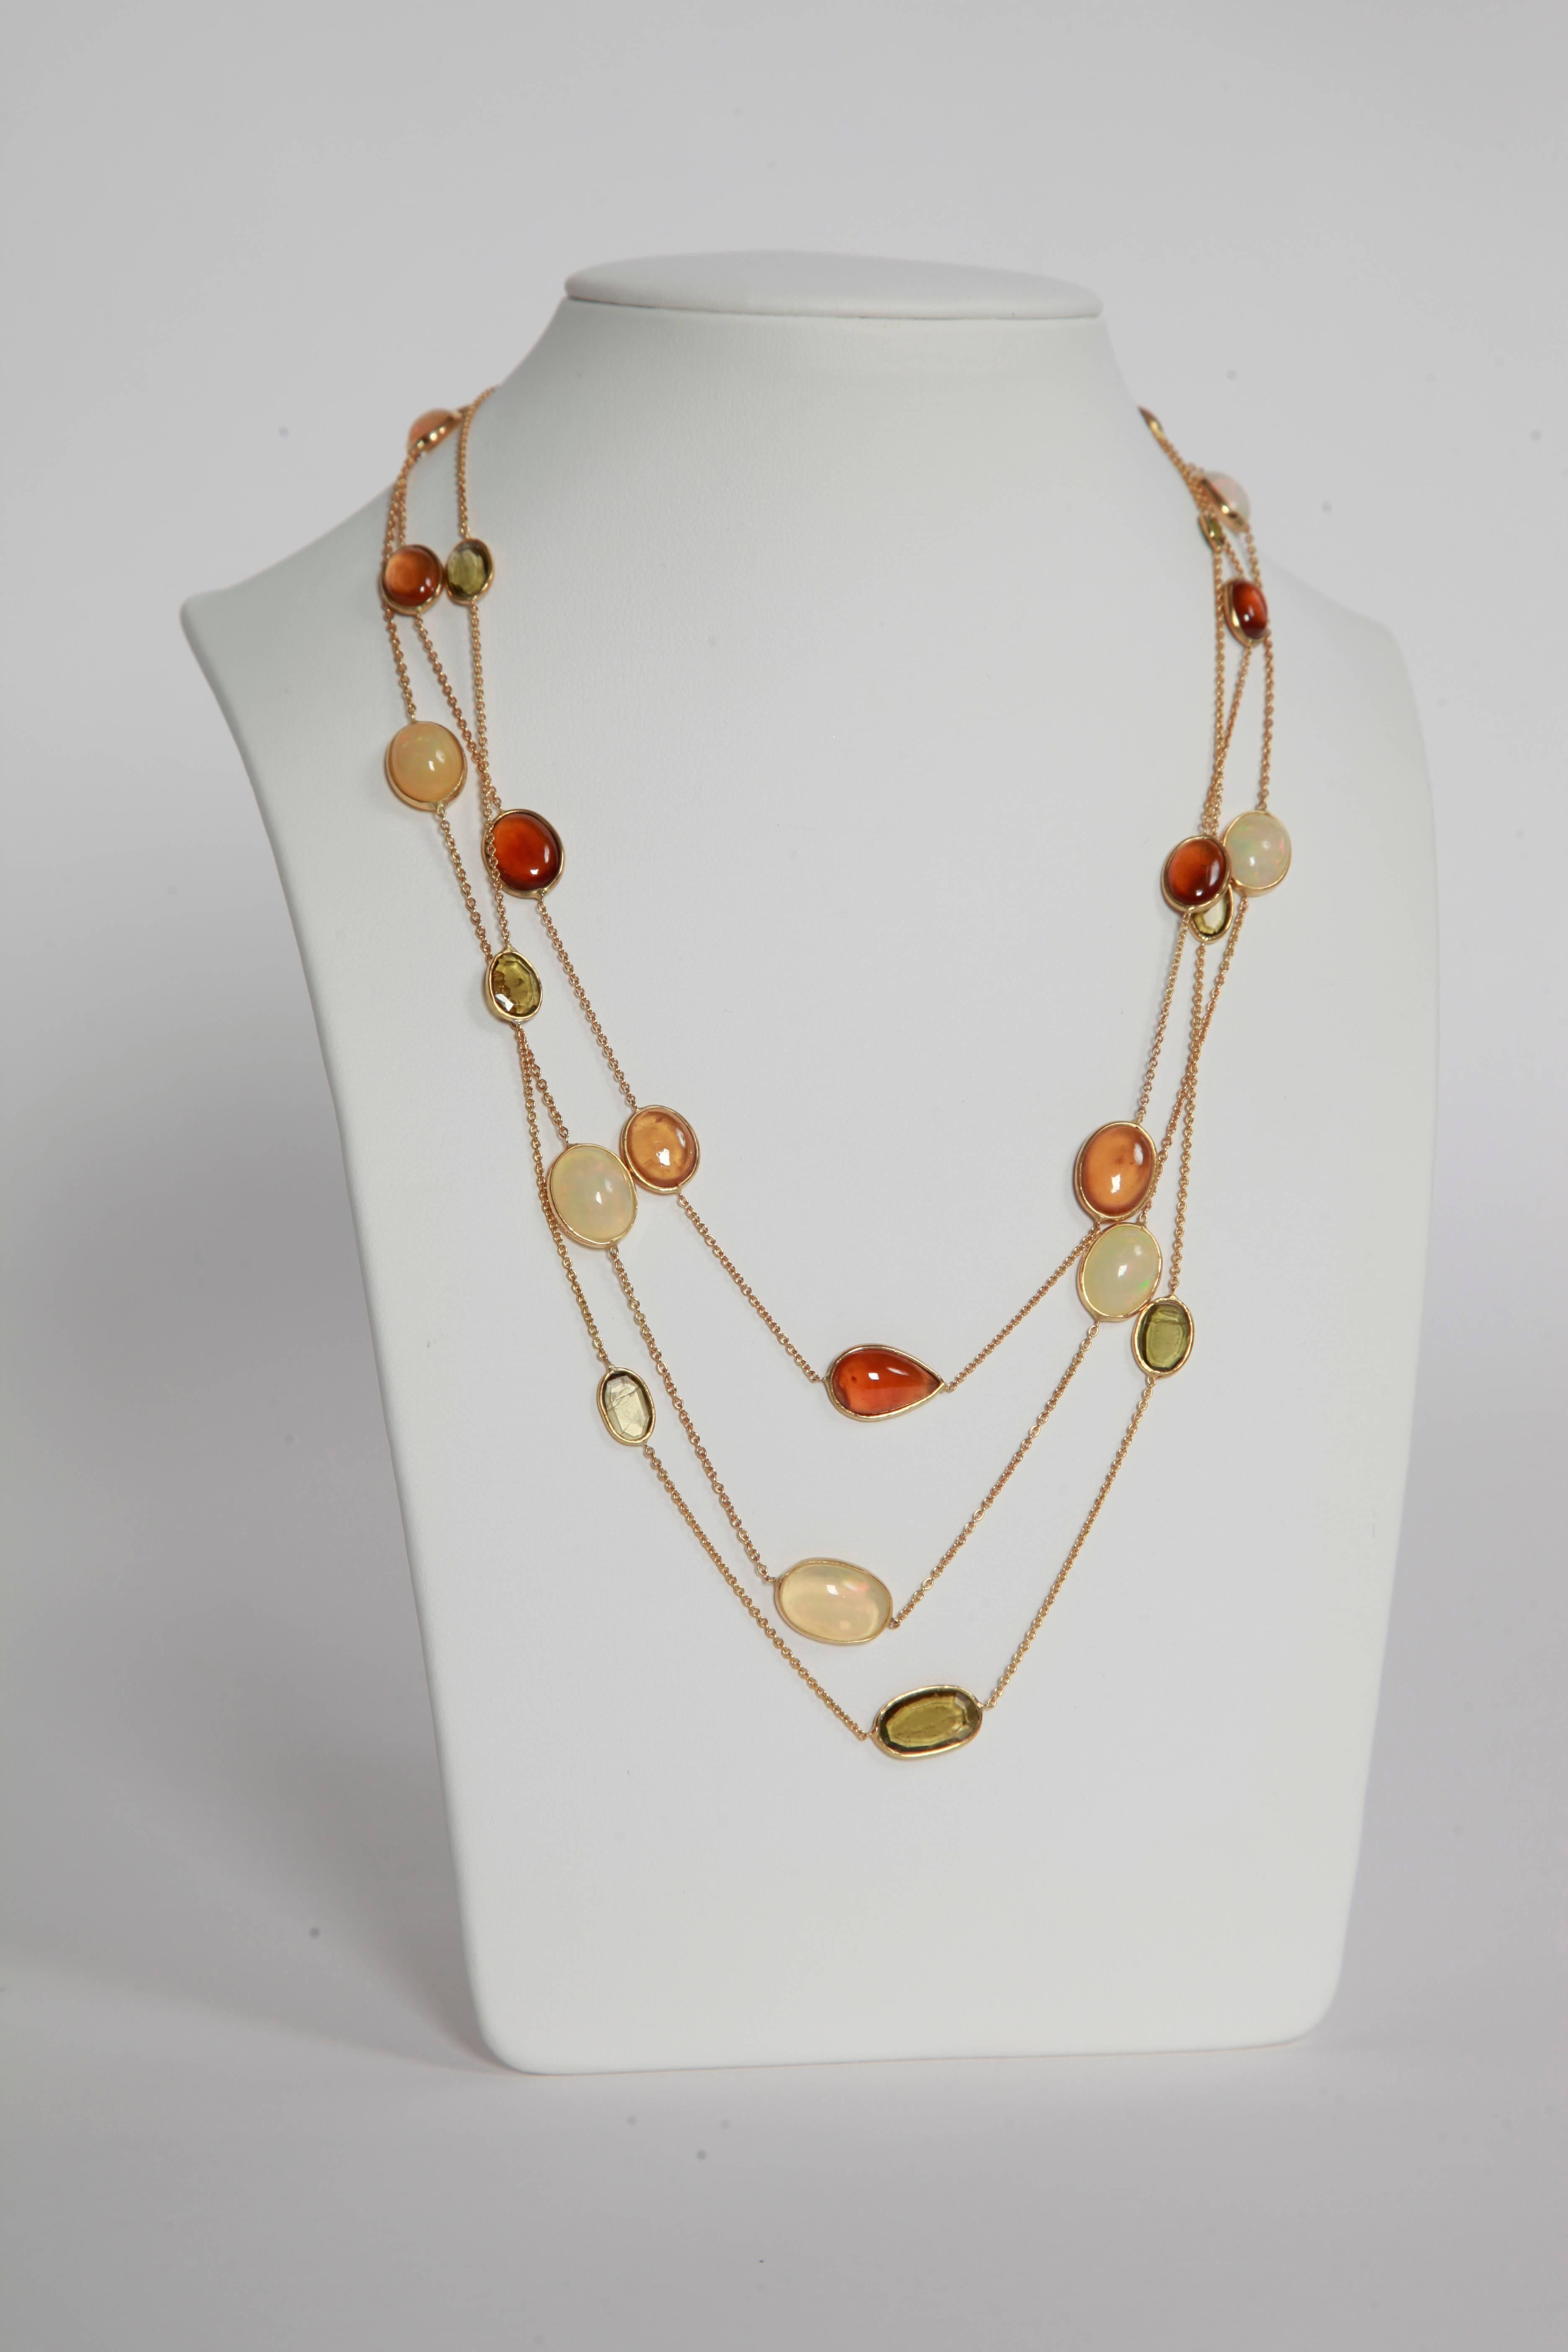 Three necklaces with a luminous cameo of opal cabochons, hessonite garnet cabochons, green tourmalines flat cut.
Can be sold séparatly.
French assay mark
Price without local taxes.
Total stones 's weight: 43.03carats